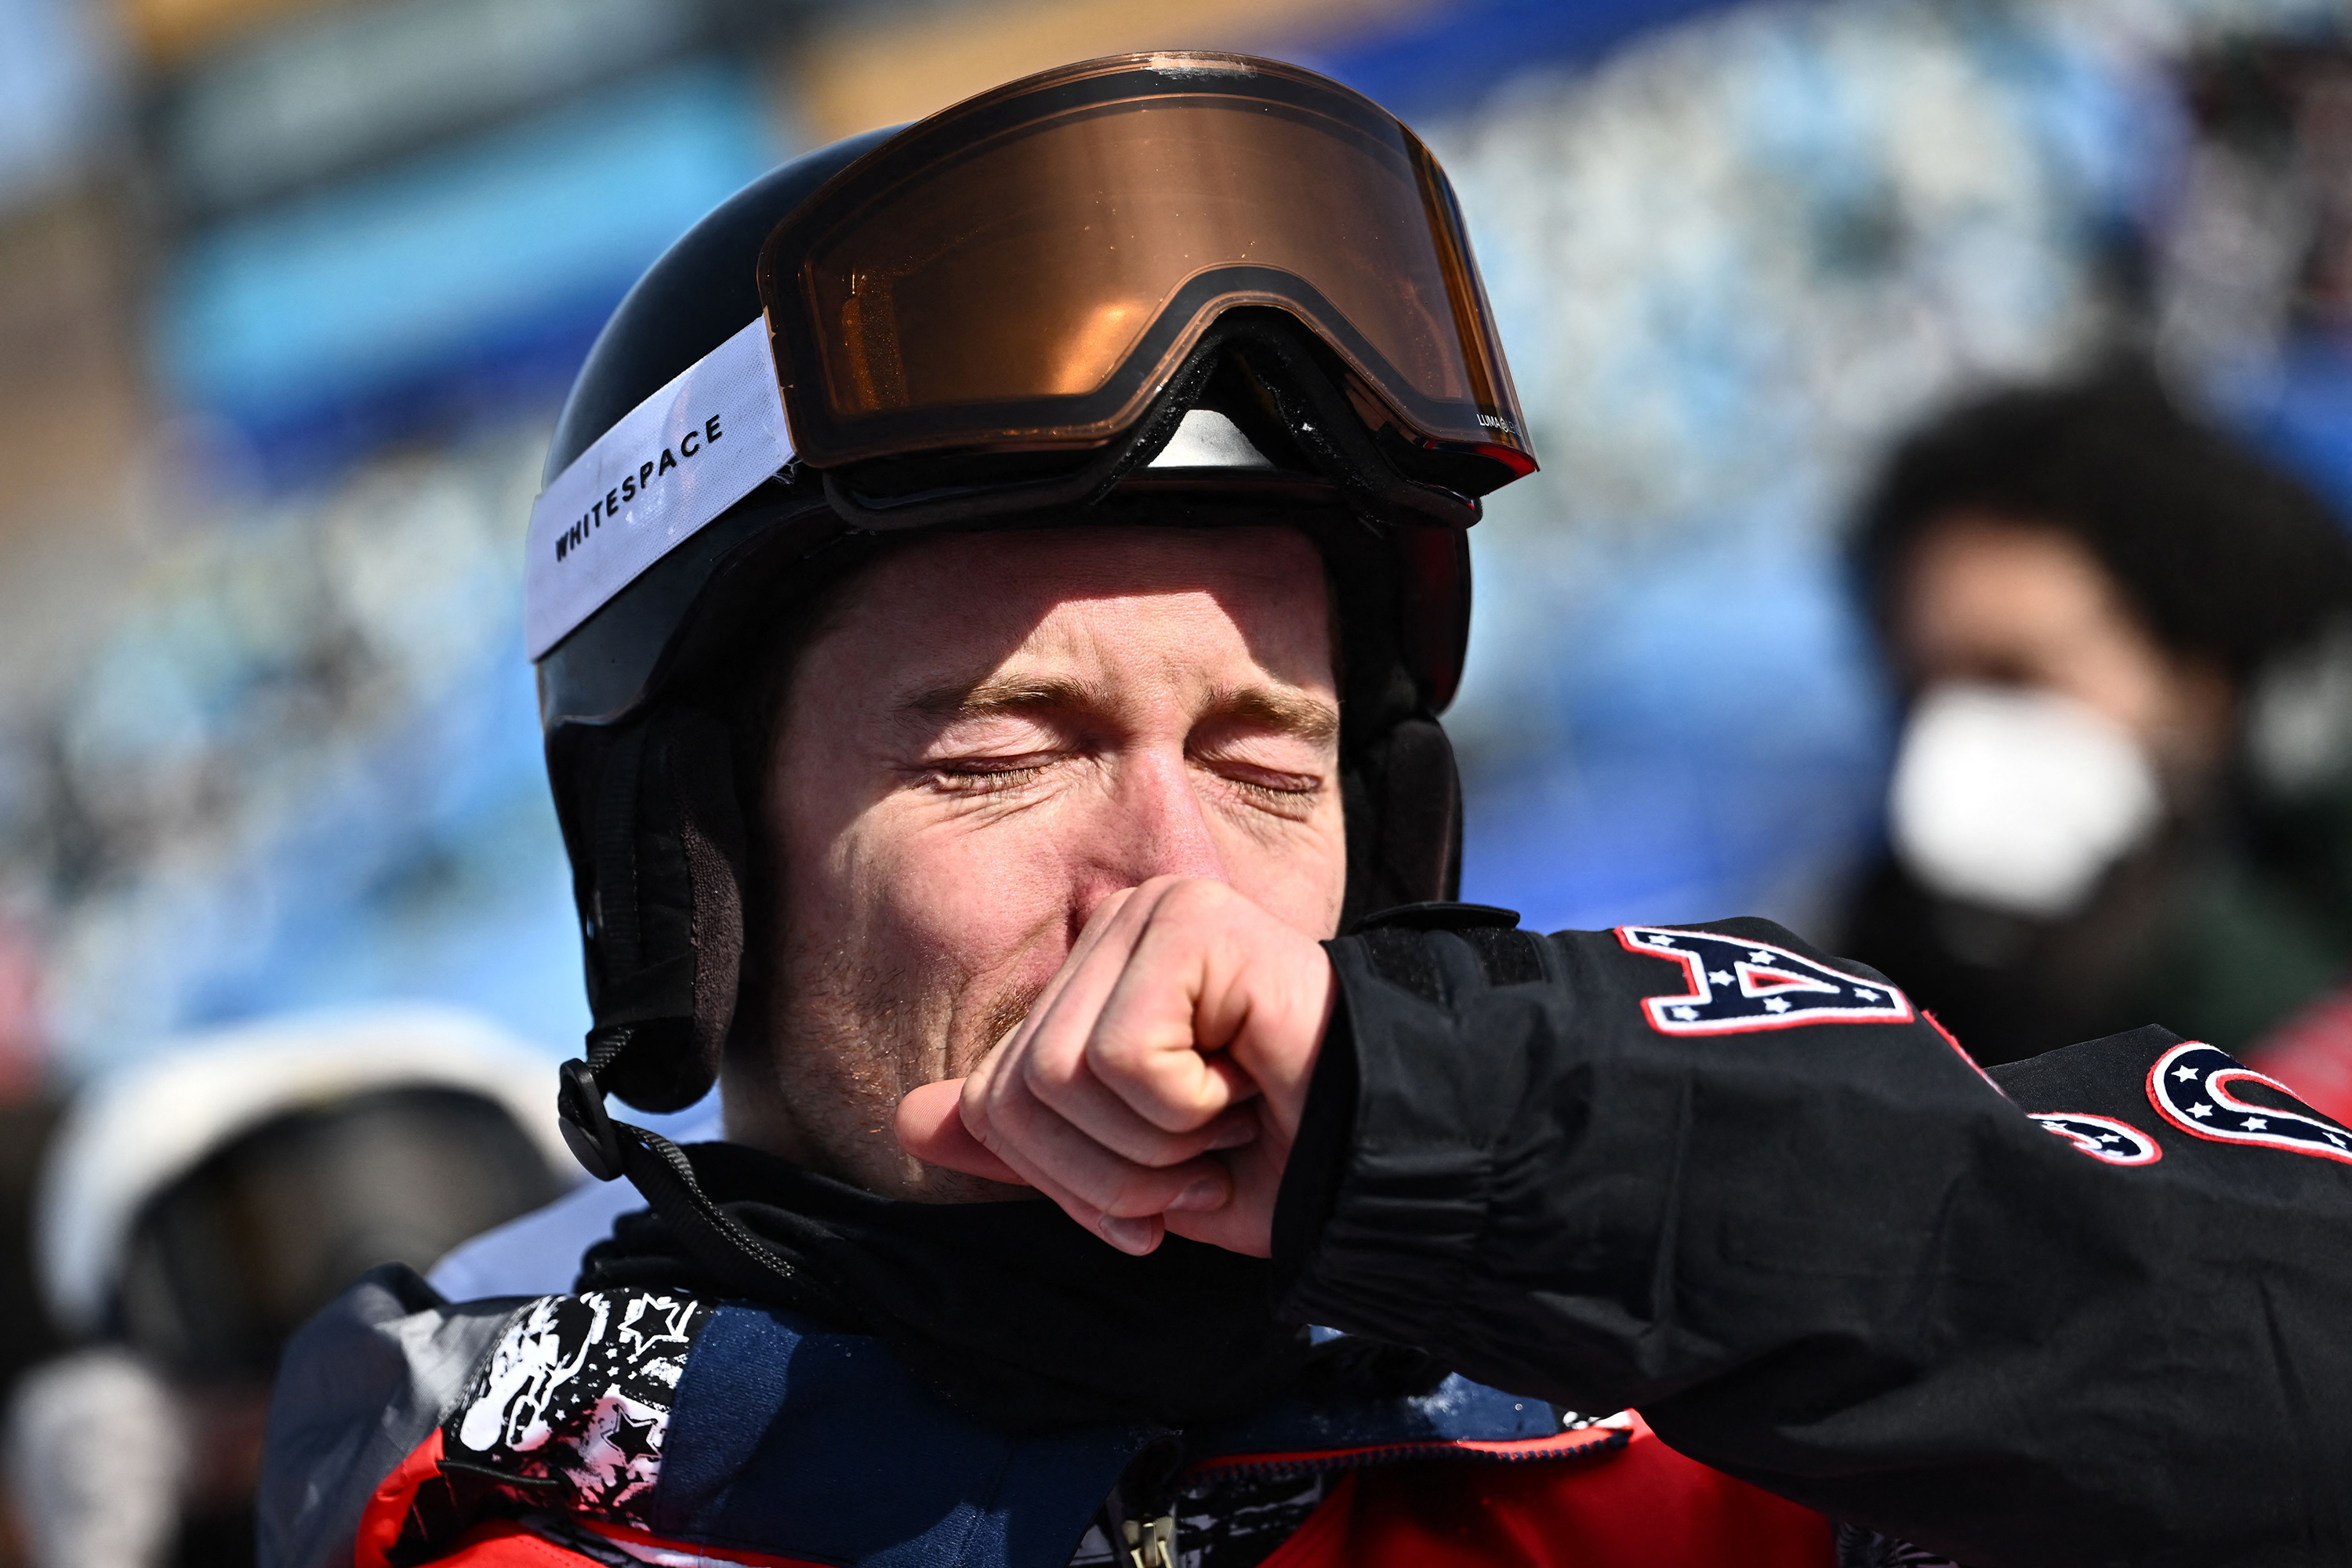 Shaun White reacts after finishing his last run in the snowboard men's halfpipe final on Friday.